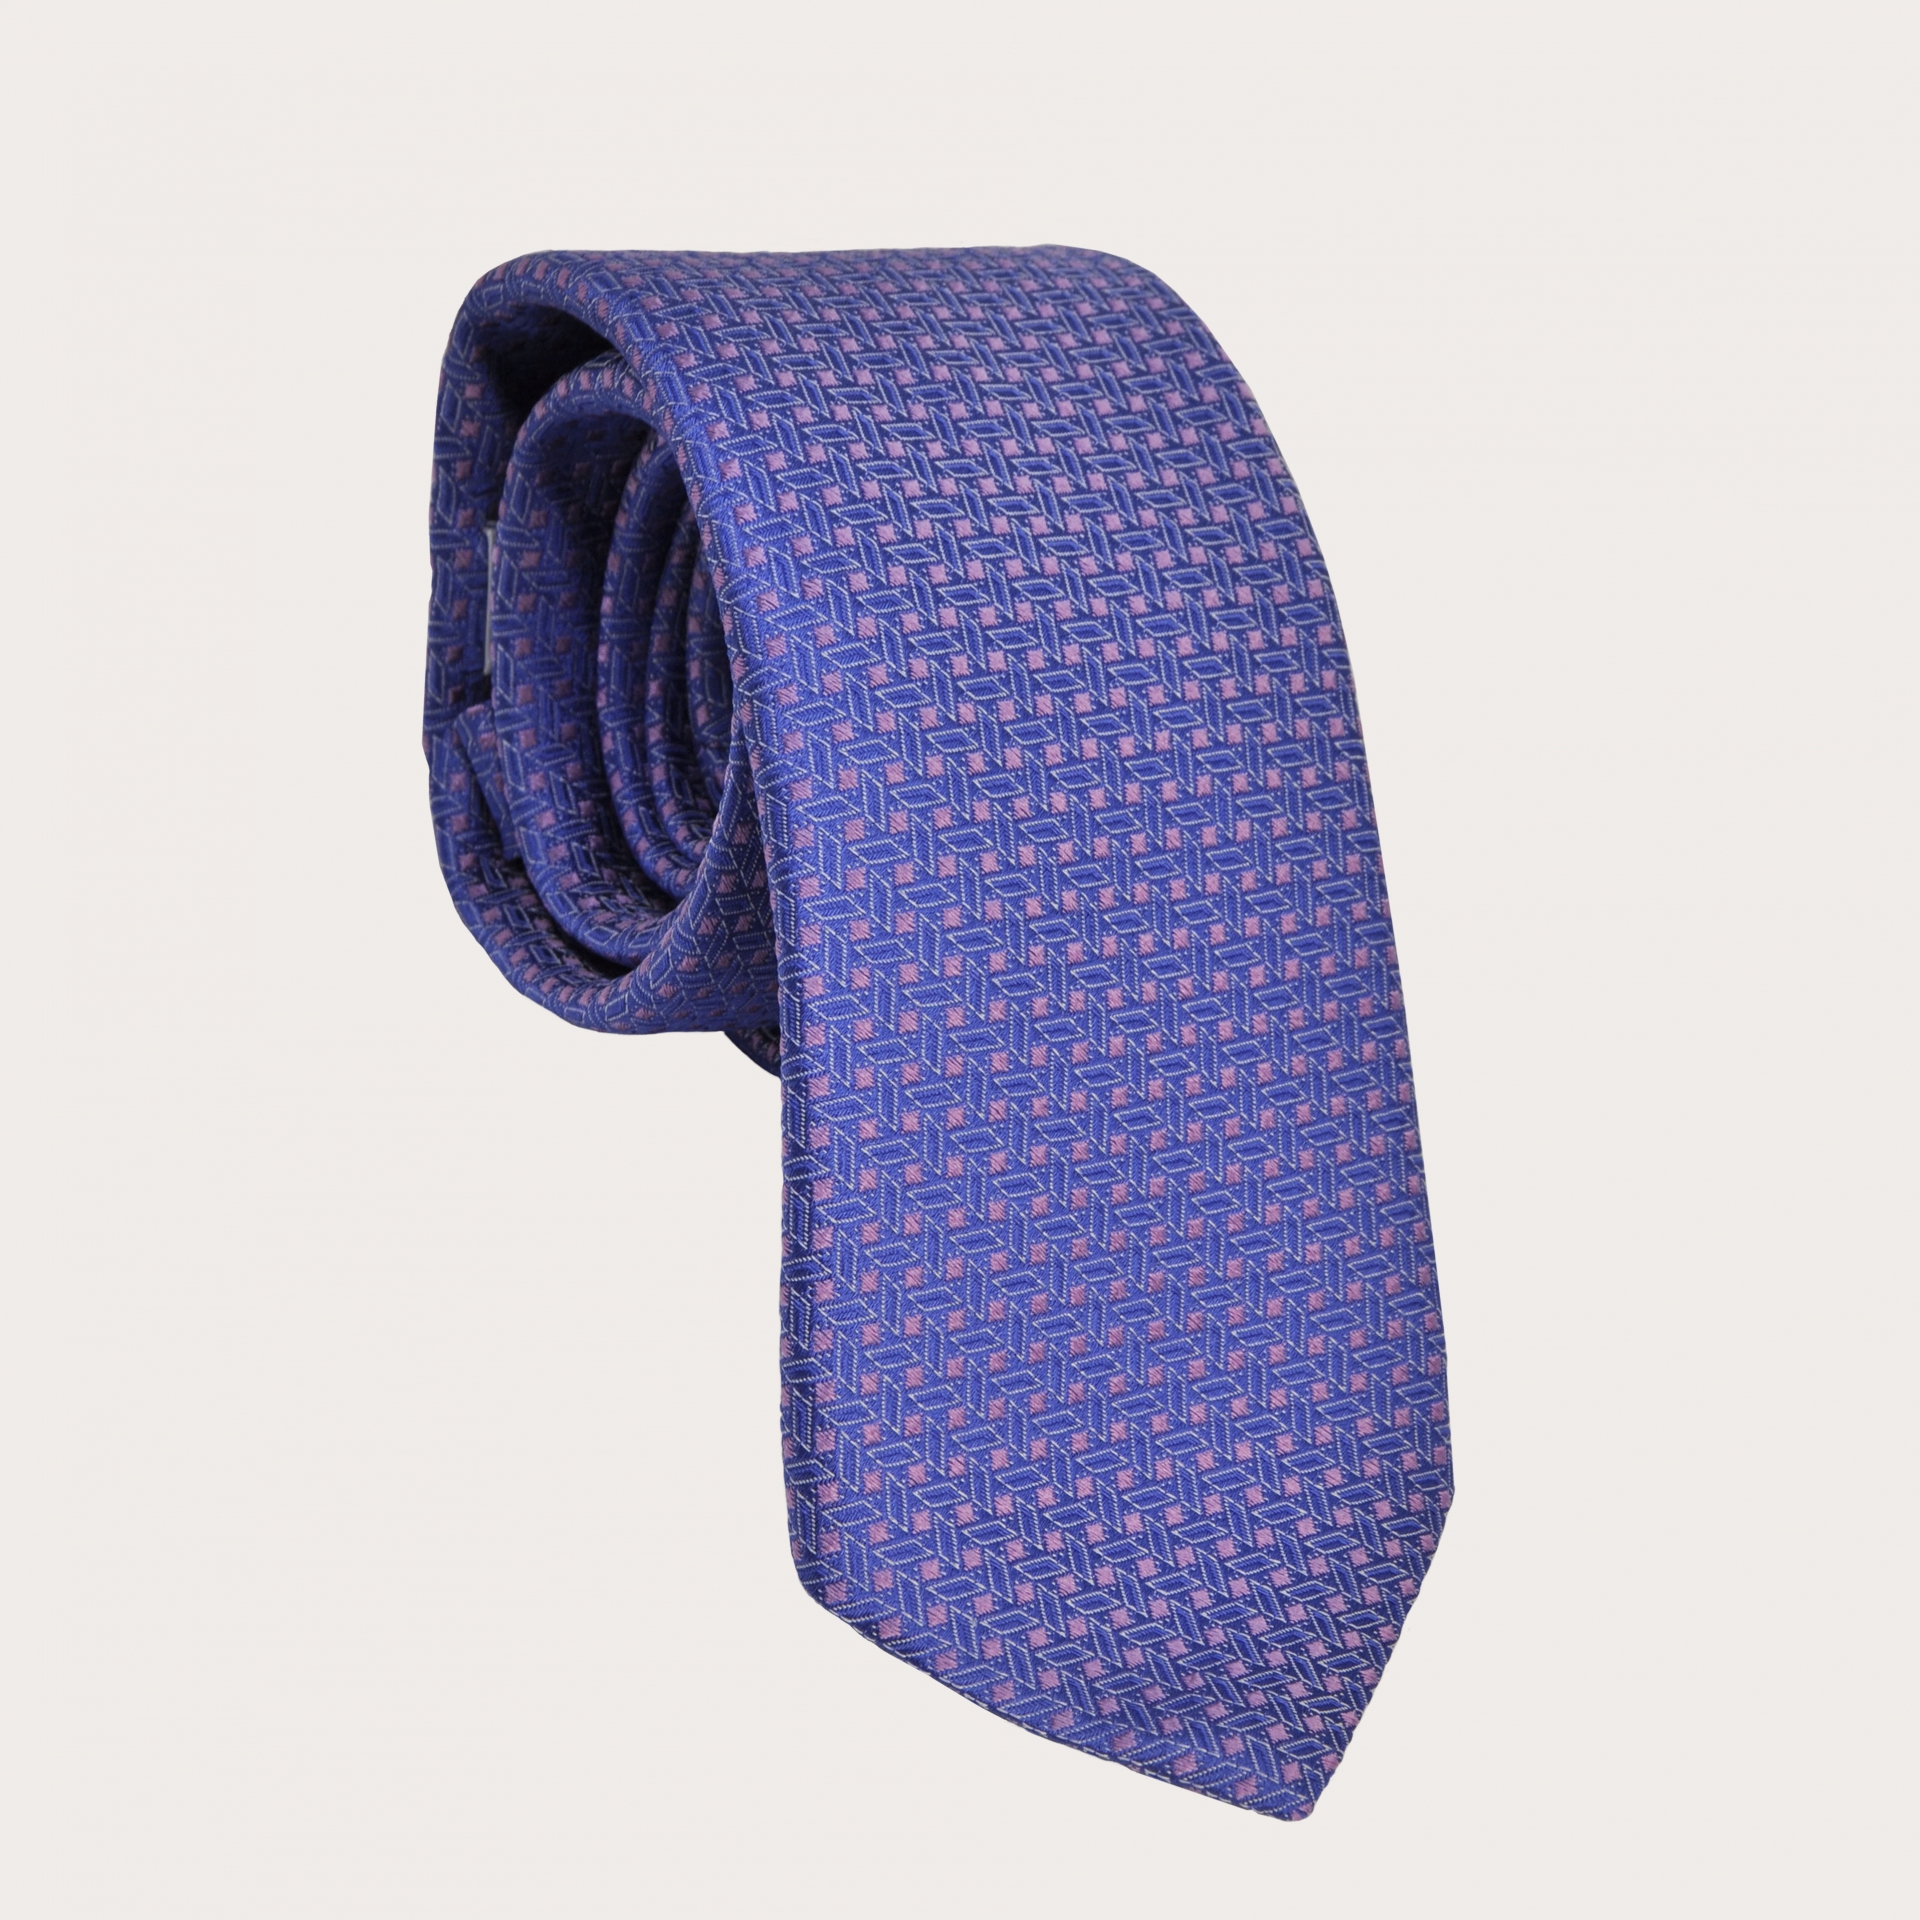 BRUCLE Silk necktie, light blue and pink with geometric pattern